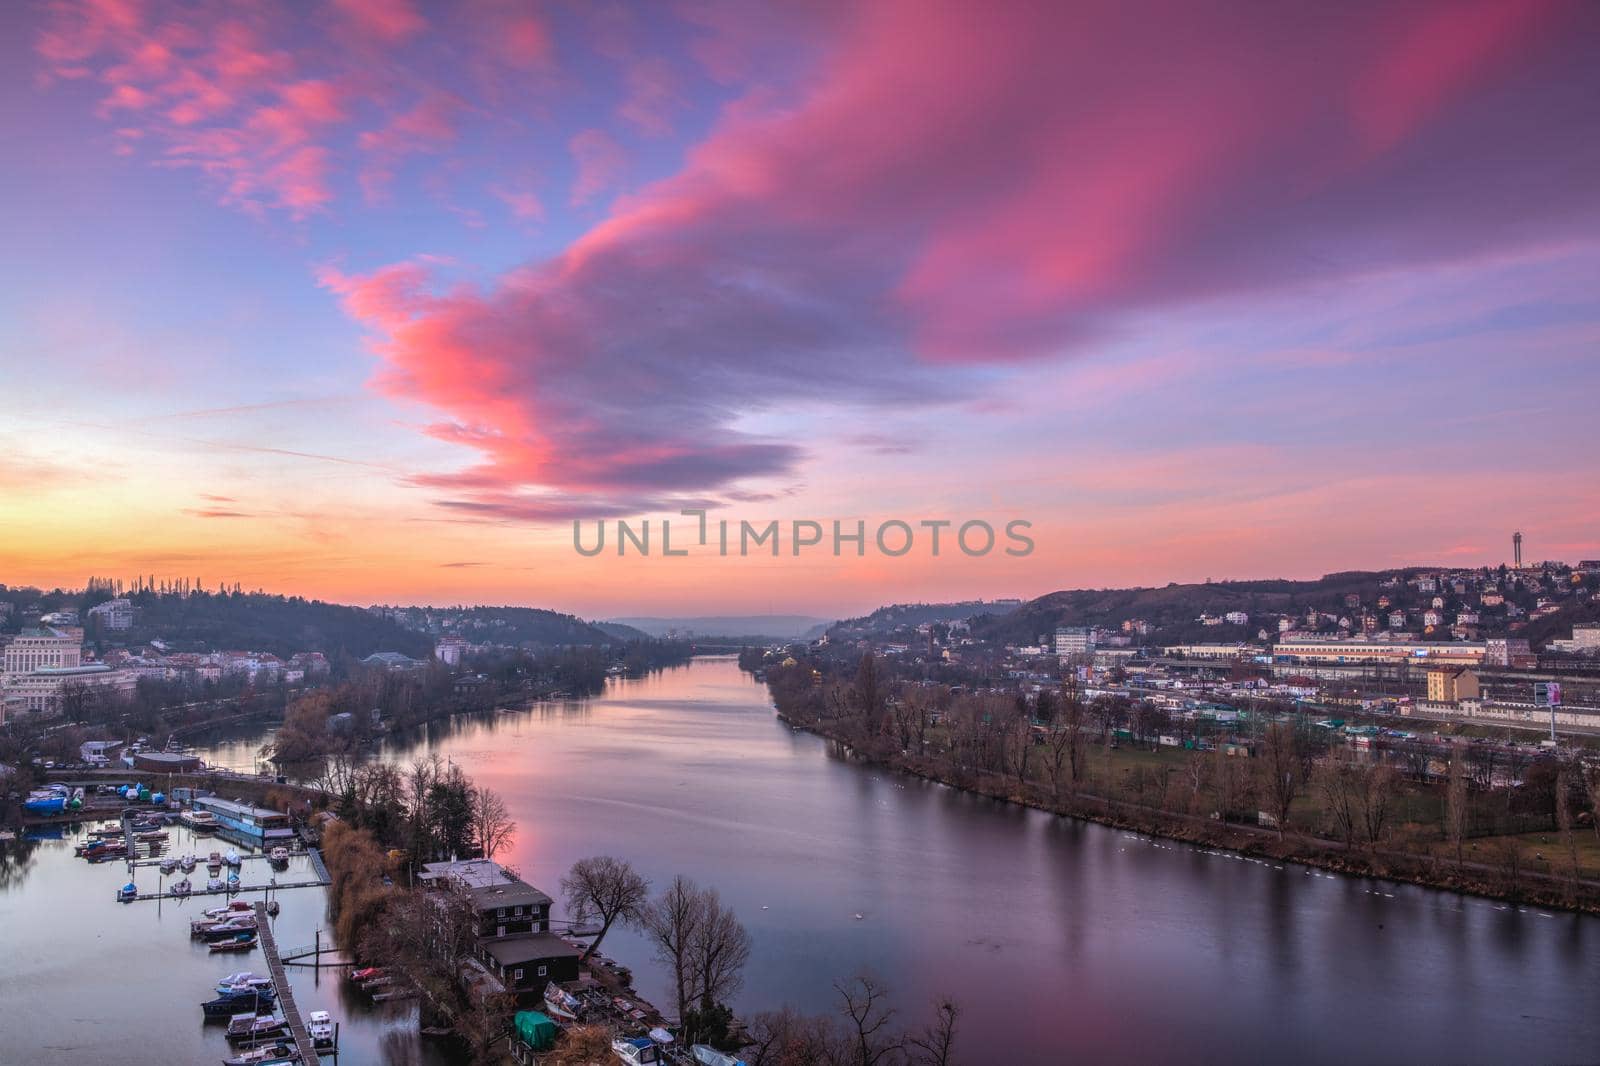 Small dock, boats and Vltava River in Prague, Czech Republic, viewed from the Vysehrad fort in the pink sunrise. Vysehrad is a historic fort located in the city of Prague. It was built probably in the 10th century.